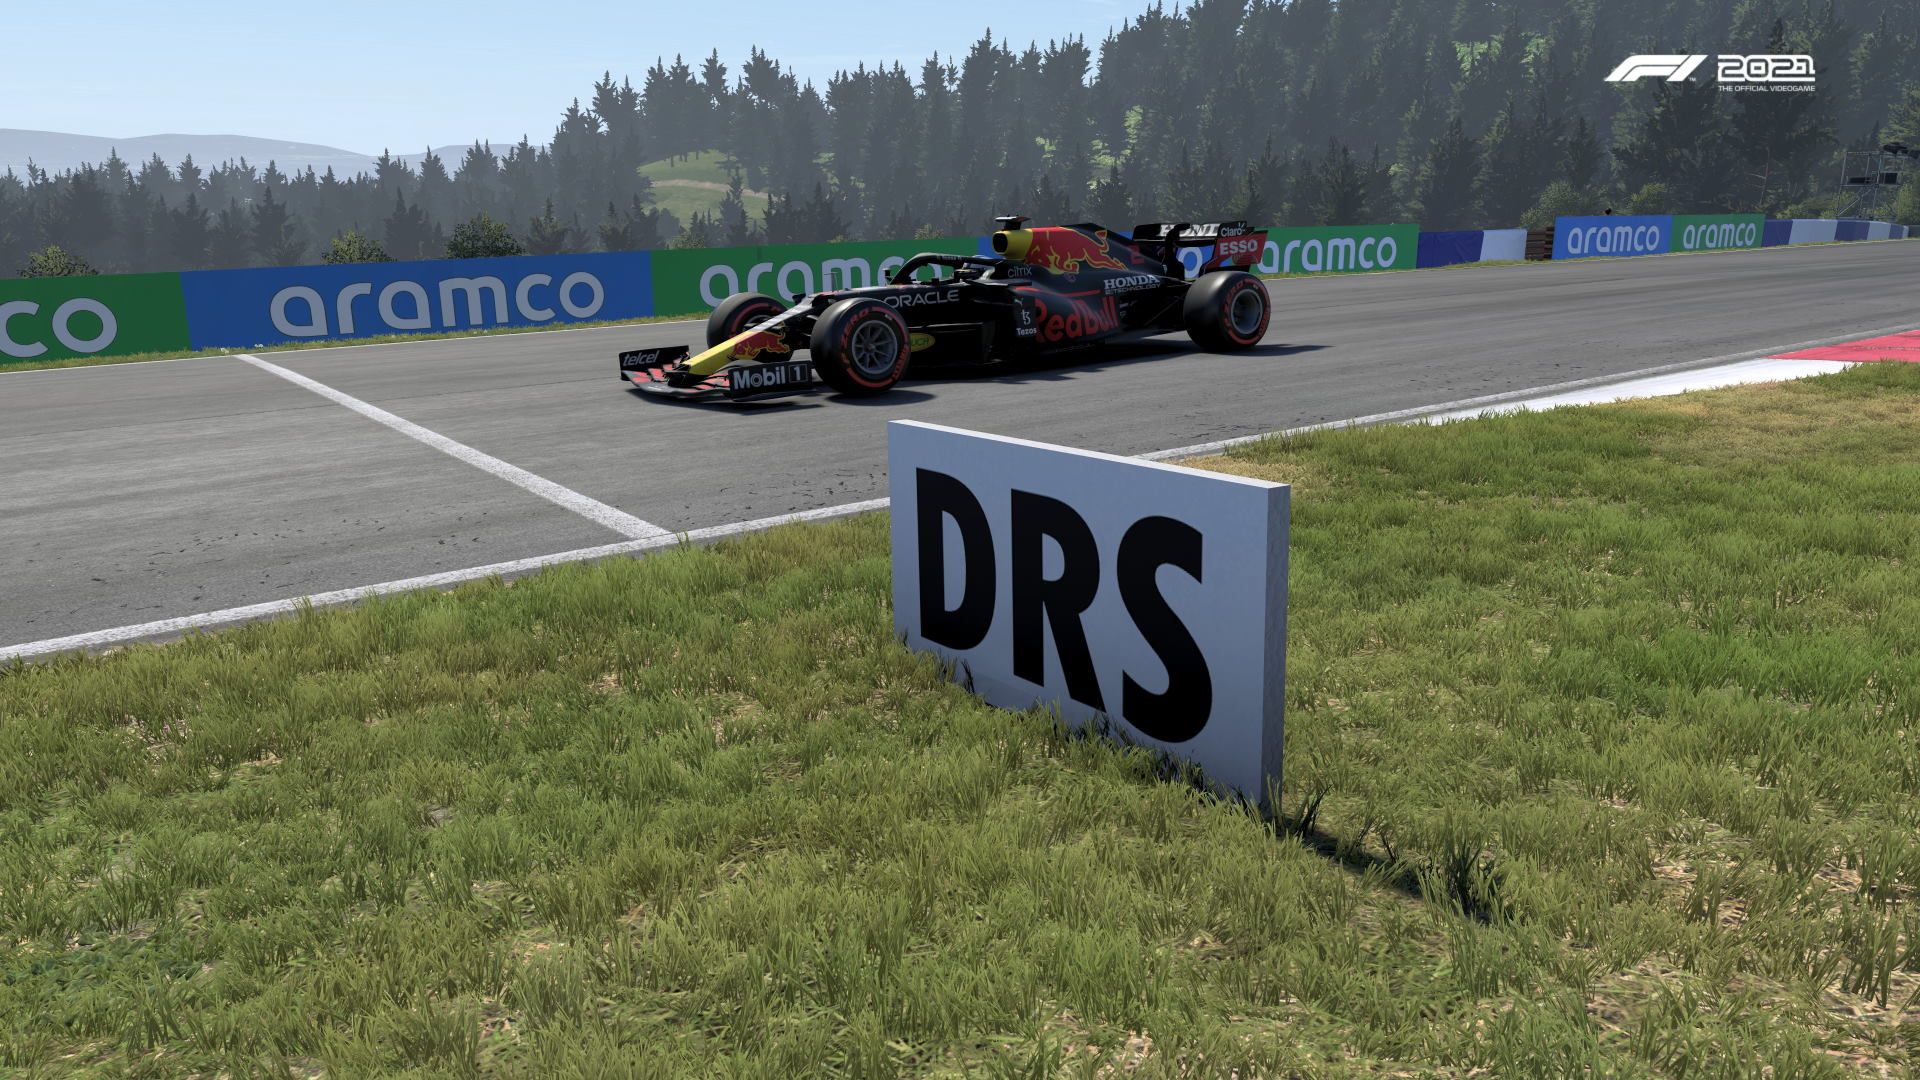 DRS Schild am Anfang der DRS Zone in F1 2021